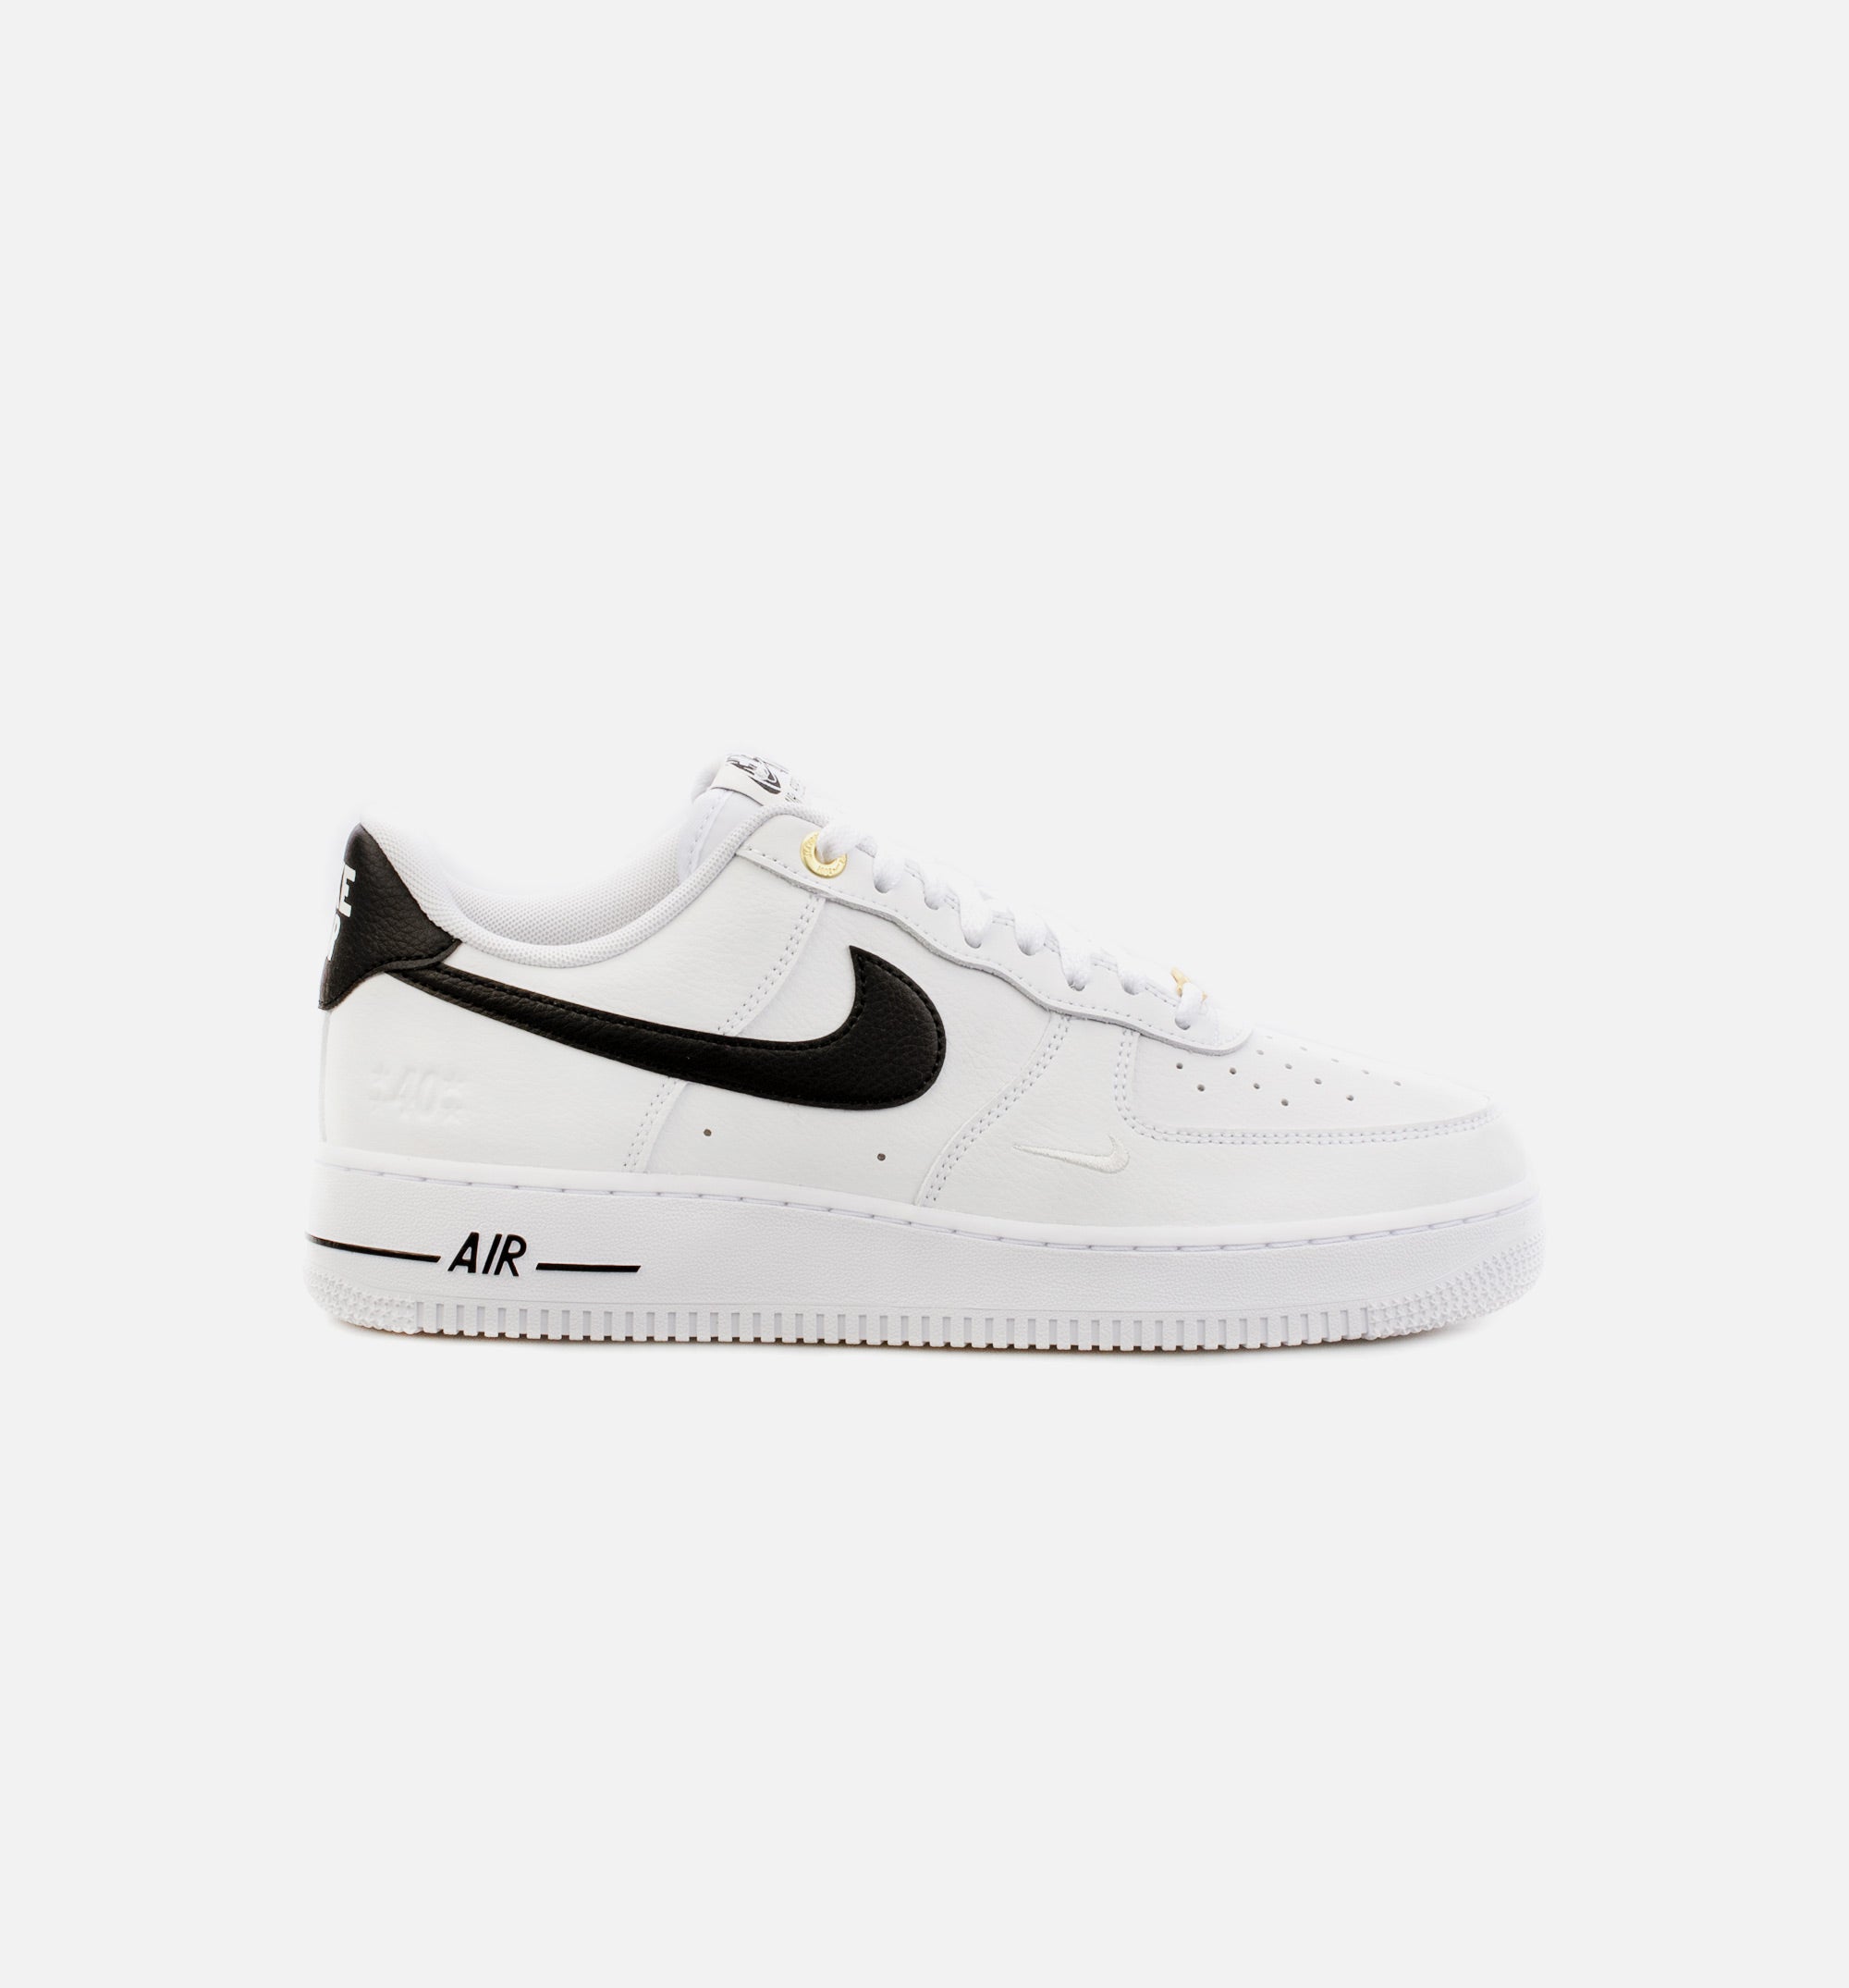 Nike Air Force 1 '07 40th anniversary sneakers in white